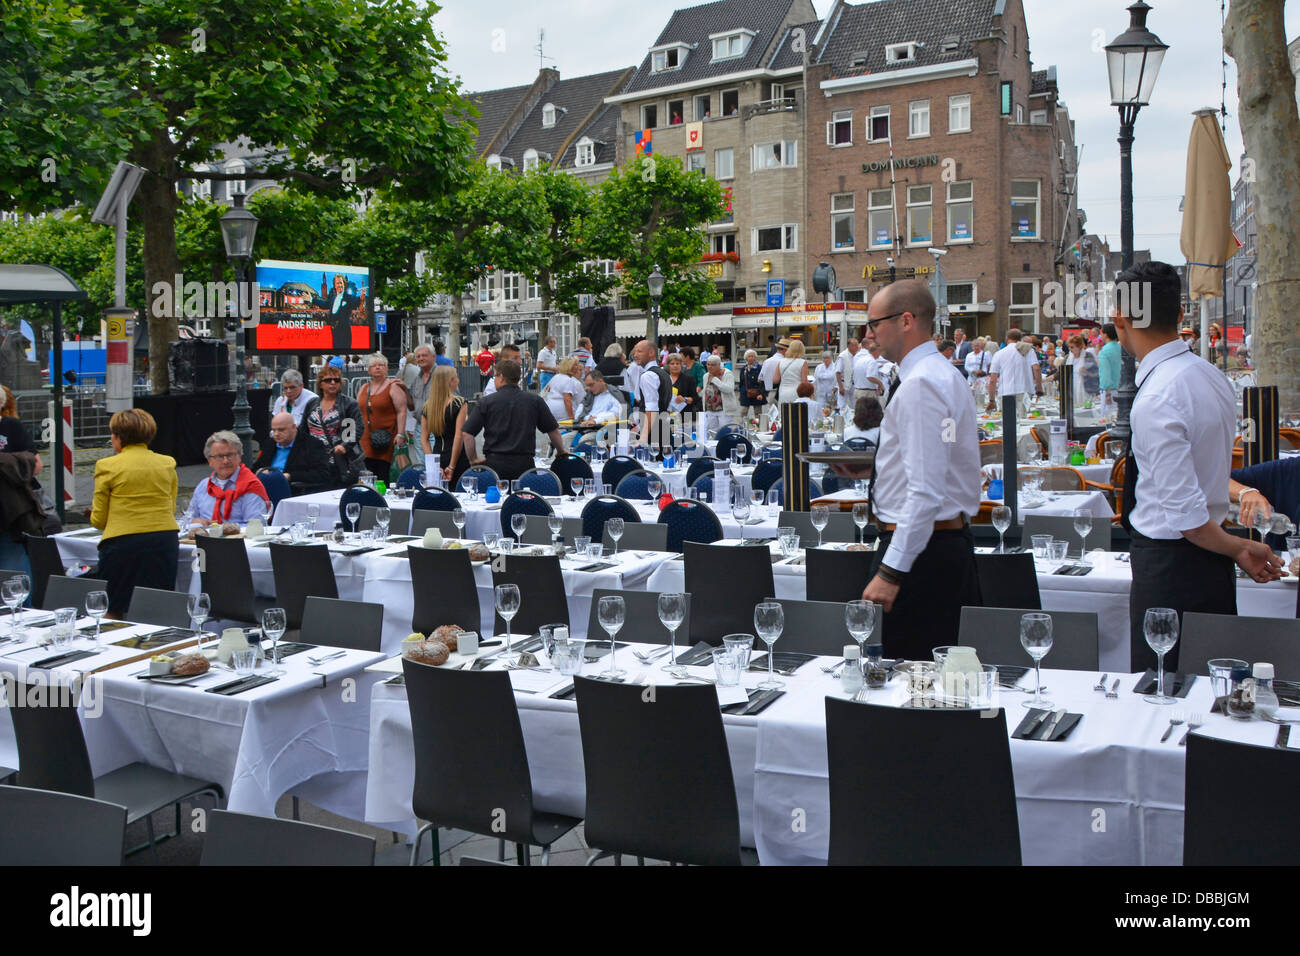 Maastricht assorted restaurant bars along Vrijthof Square pavement prepared tables await ticket holders for André Rieu outdoor evening music concert Stock Photo